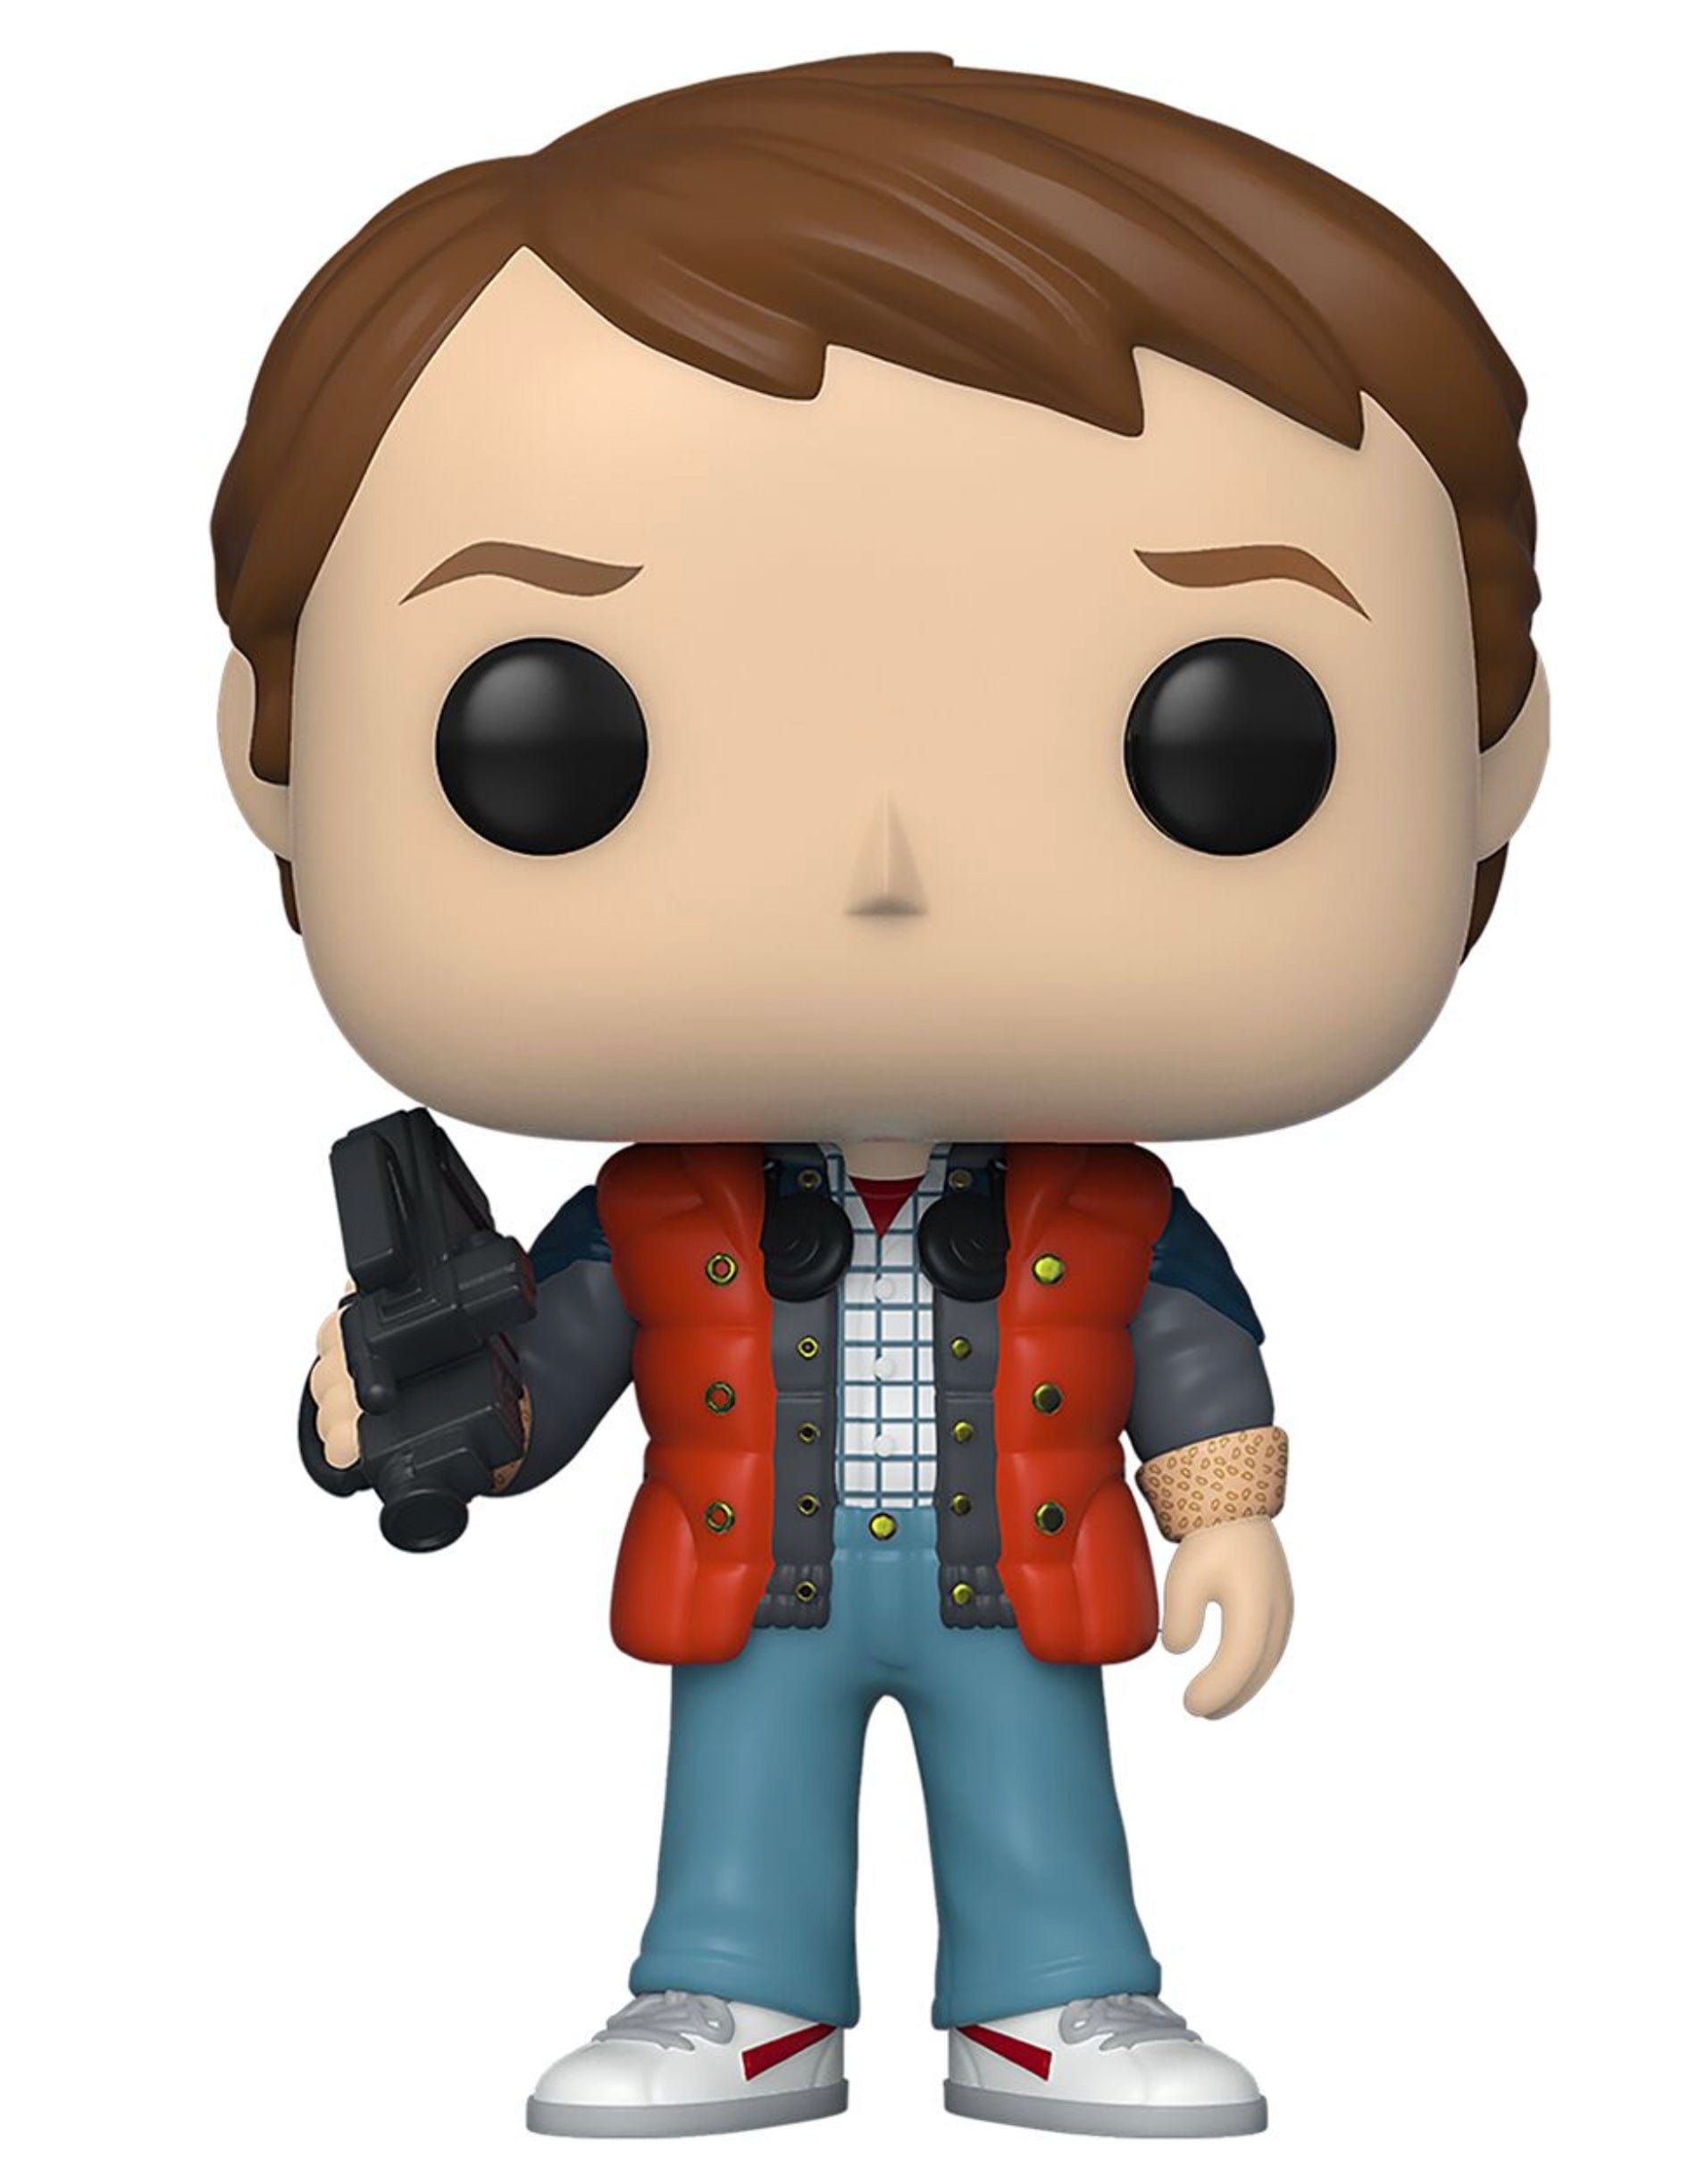 Funko Pop! Movies: Back to the Future - Marty in Puffy Vest Vinyl Figure Toy 961